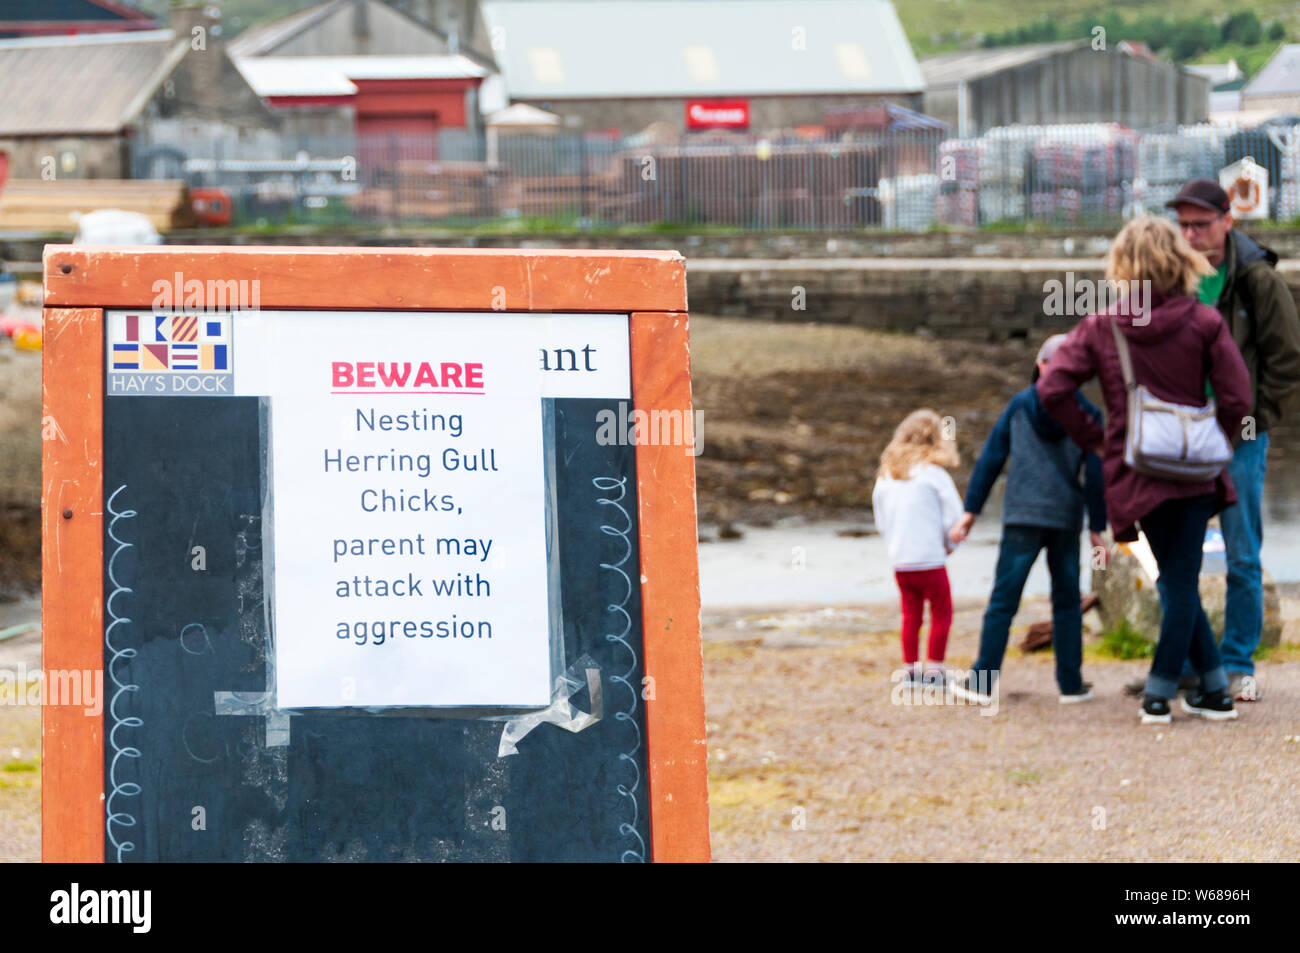 A sign at Hay's Dock, Lerwick warns about nesting aggressive herring gulls. Stock Photo